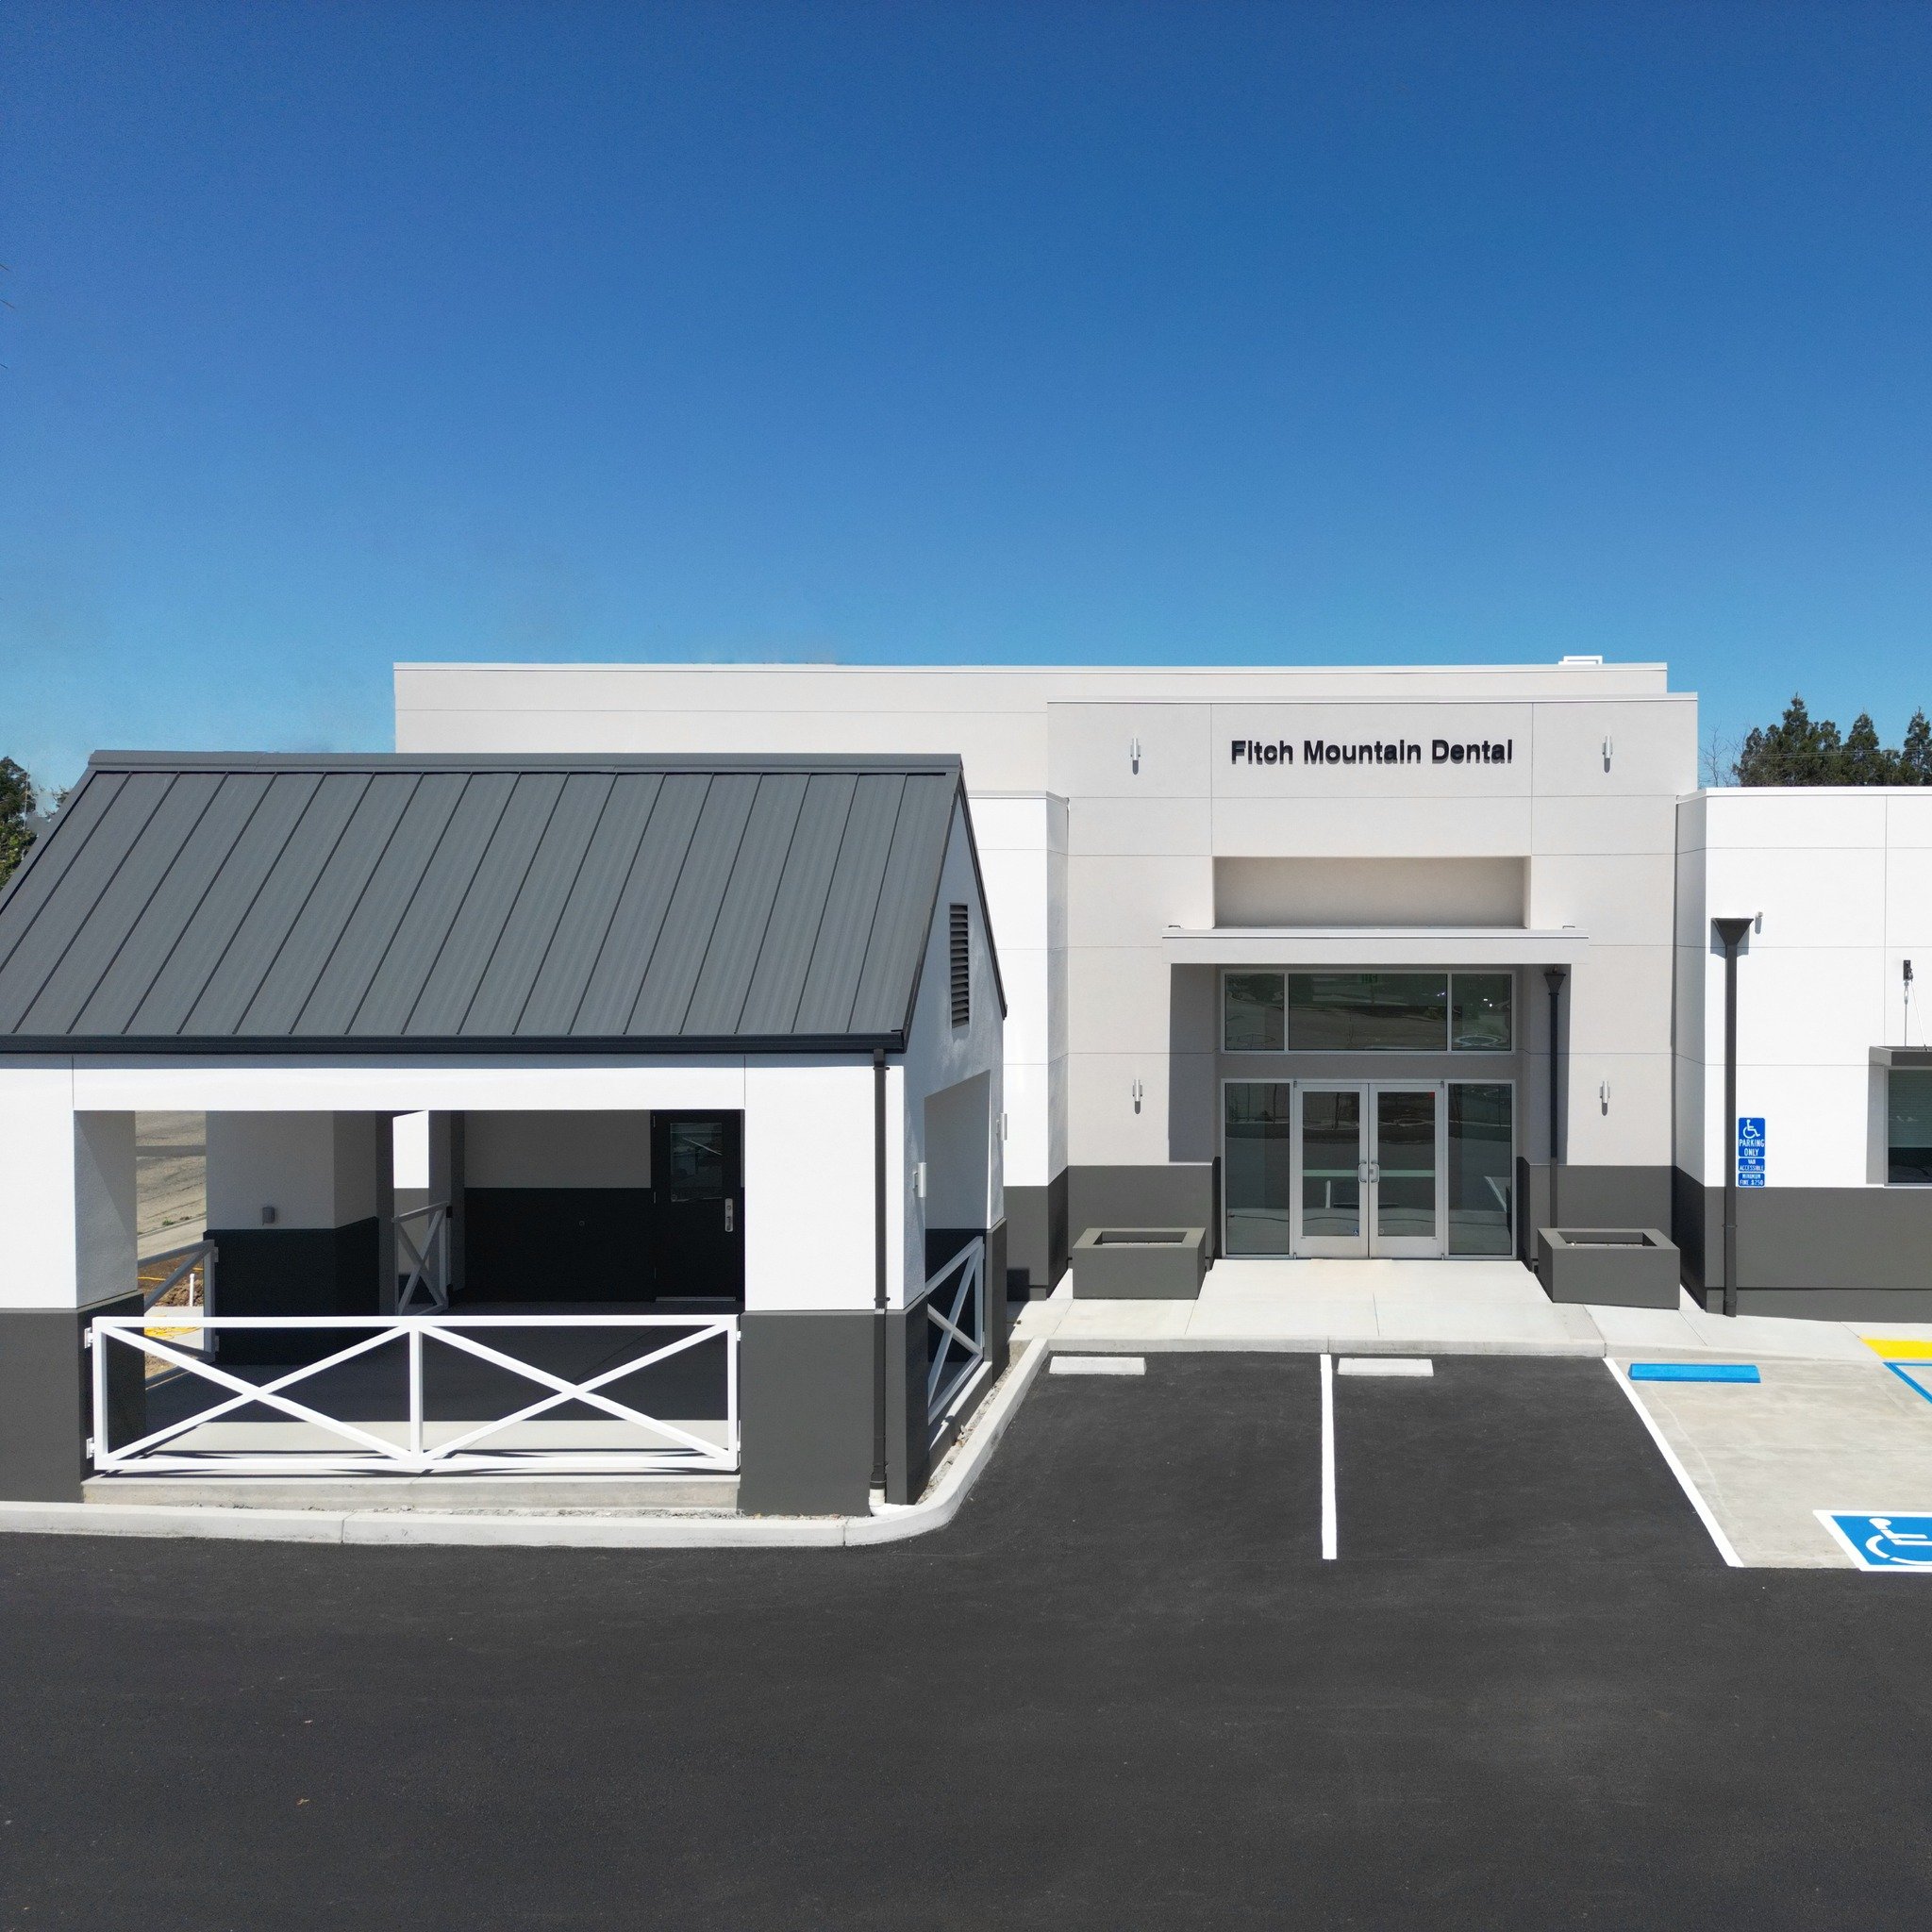 Putting the finishing touches on Fitch Mountain Dental's new office space and dental practice! @fitchmountaindental 

The building features a modern 6,126 square-foot, dental office building.  Designed as a single-story - featuring a polished stucco 